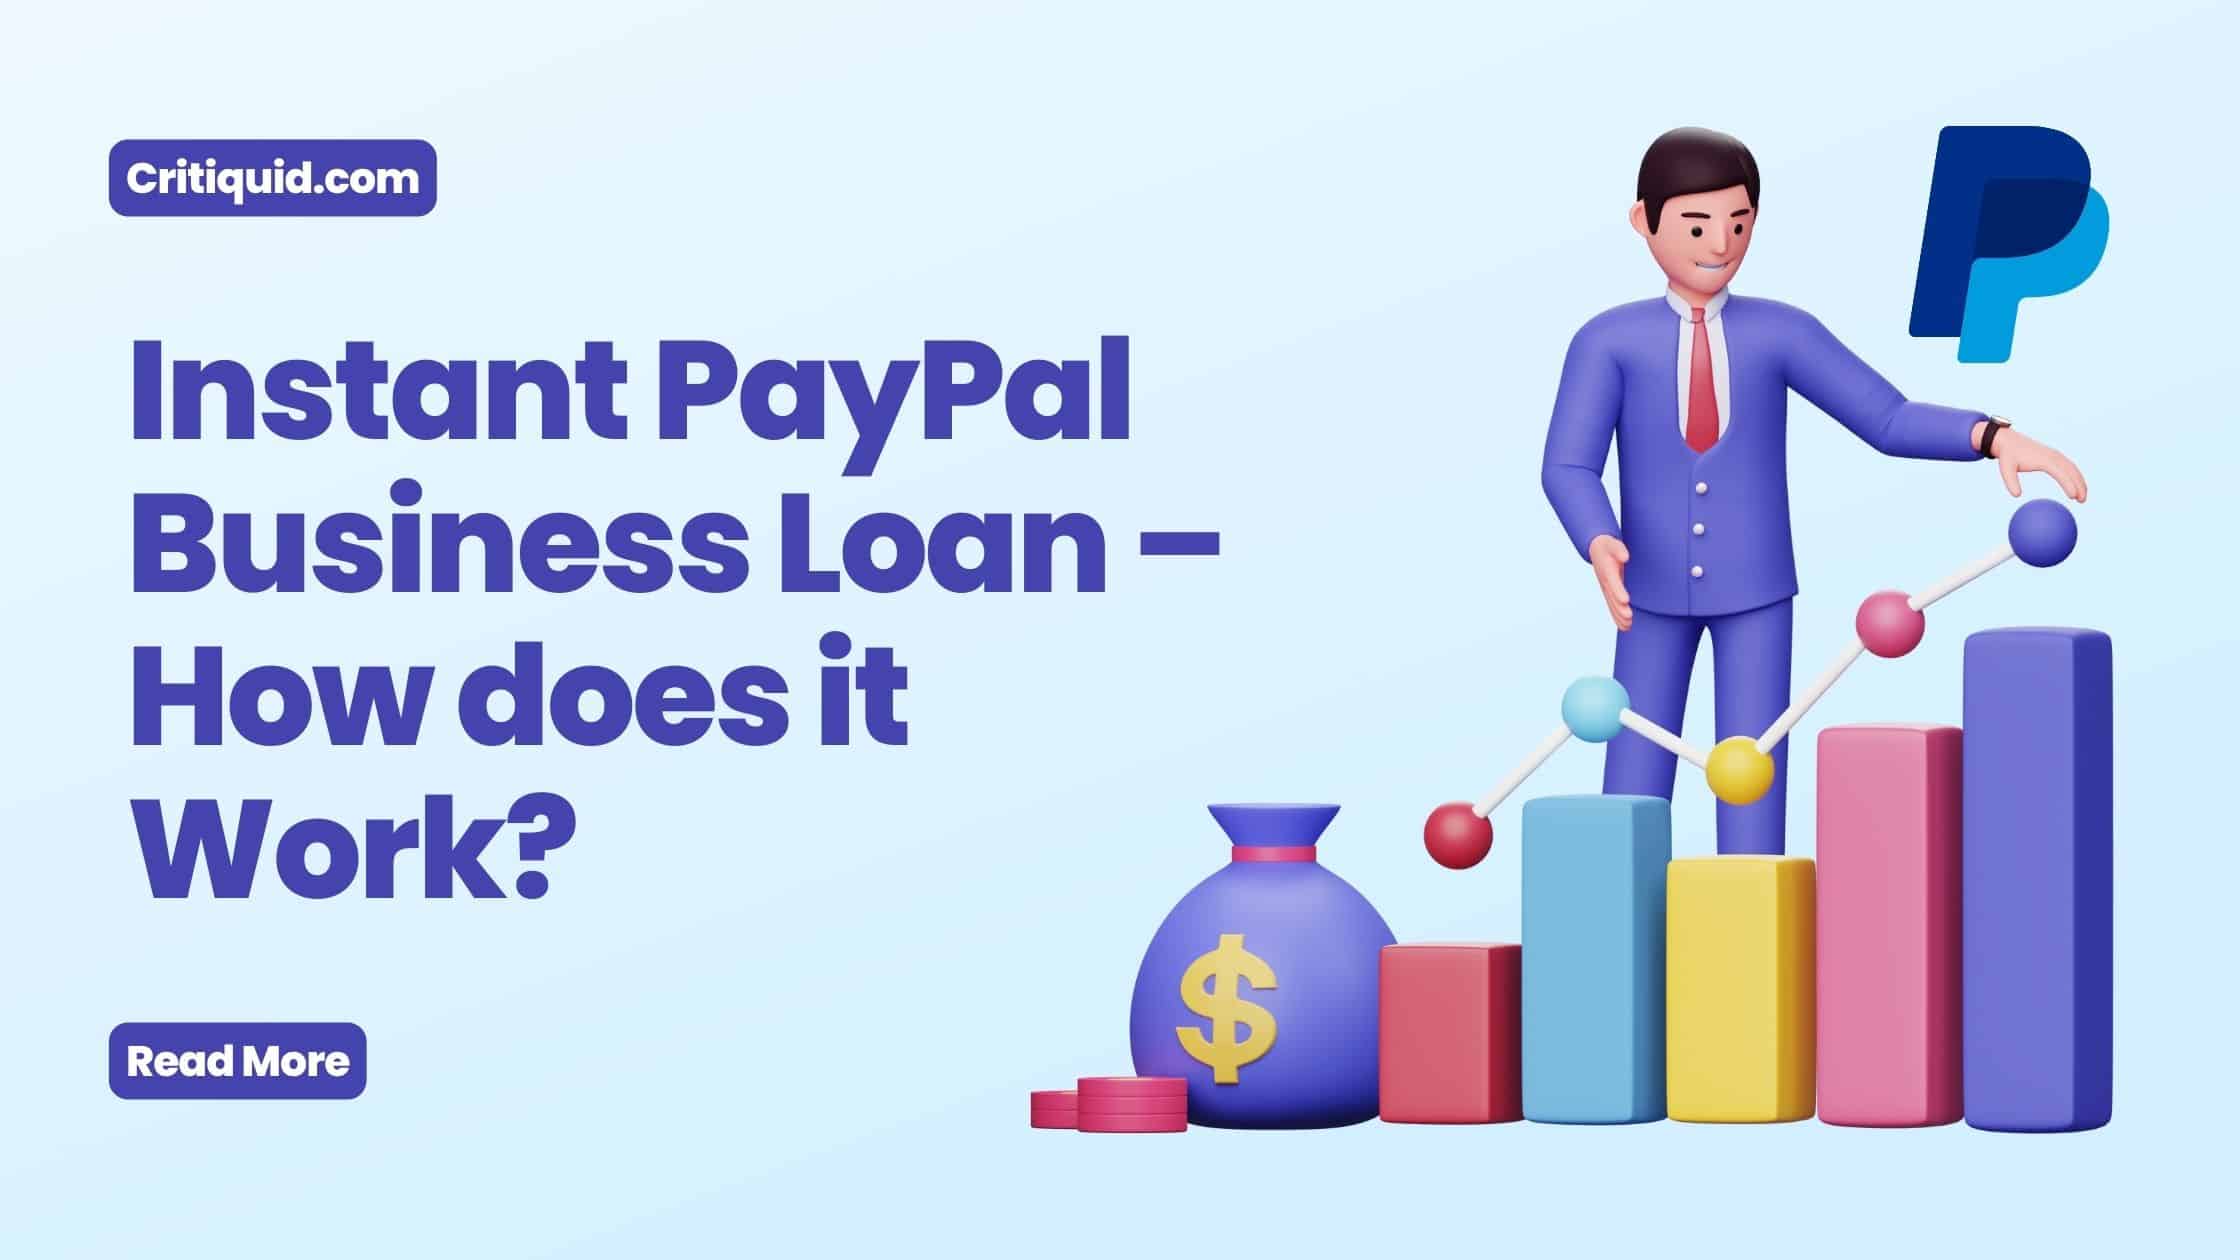 Instant PayPal Business Loan